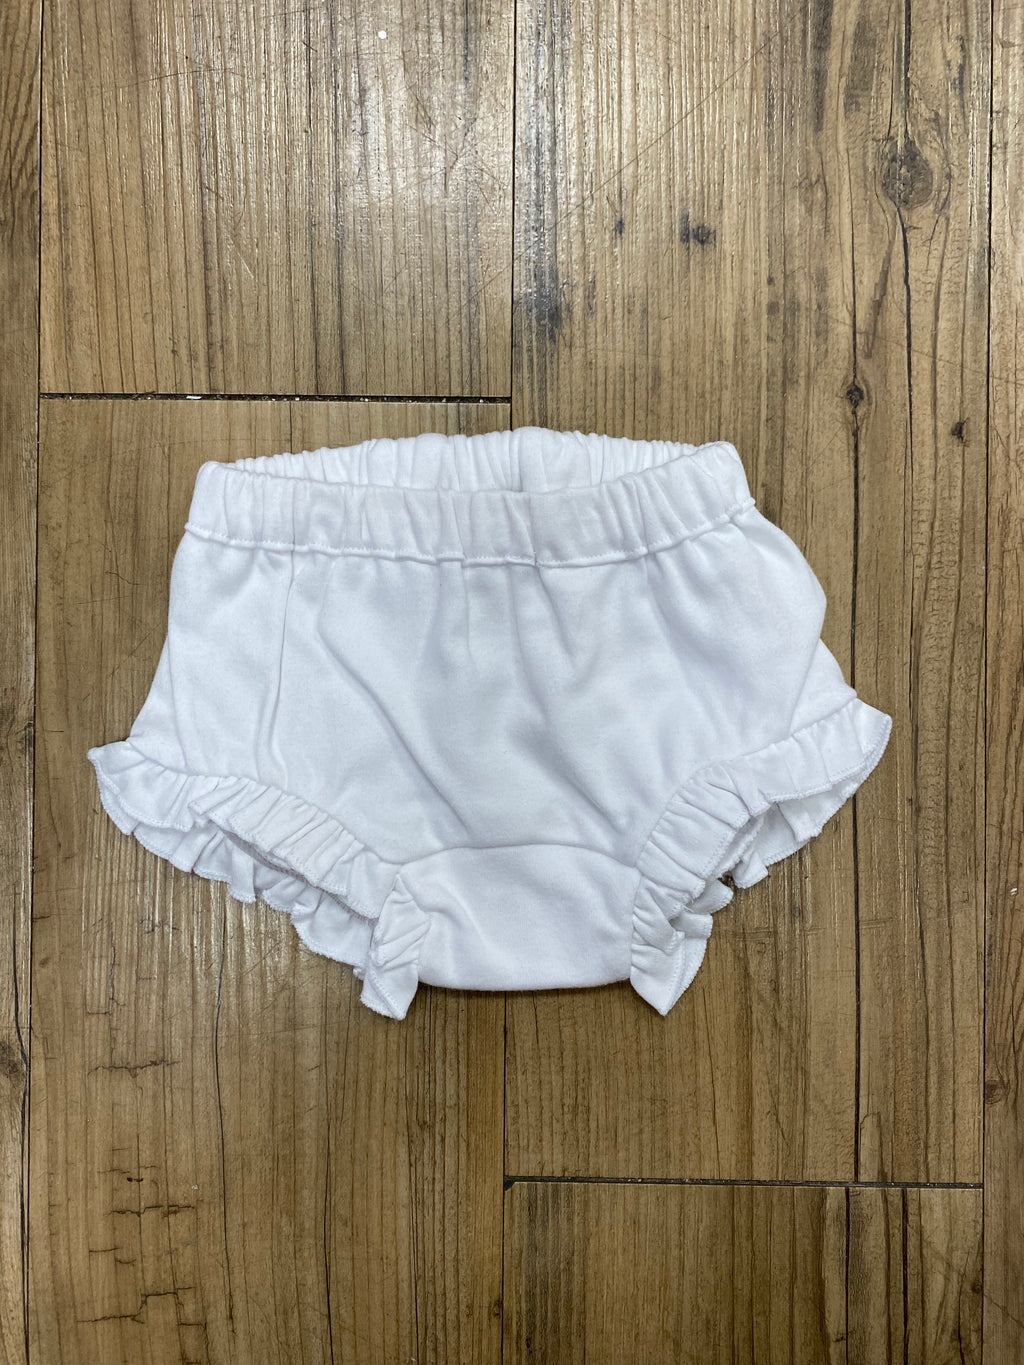 Blanks Boutique Ruffled Bloomers